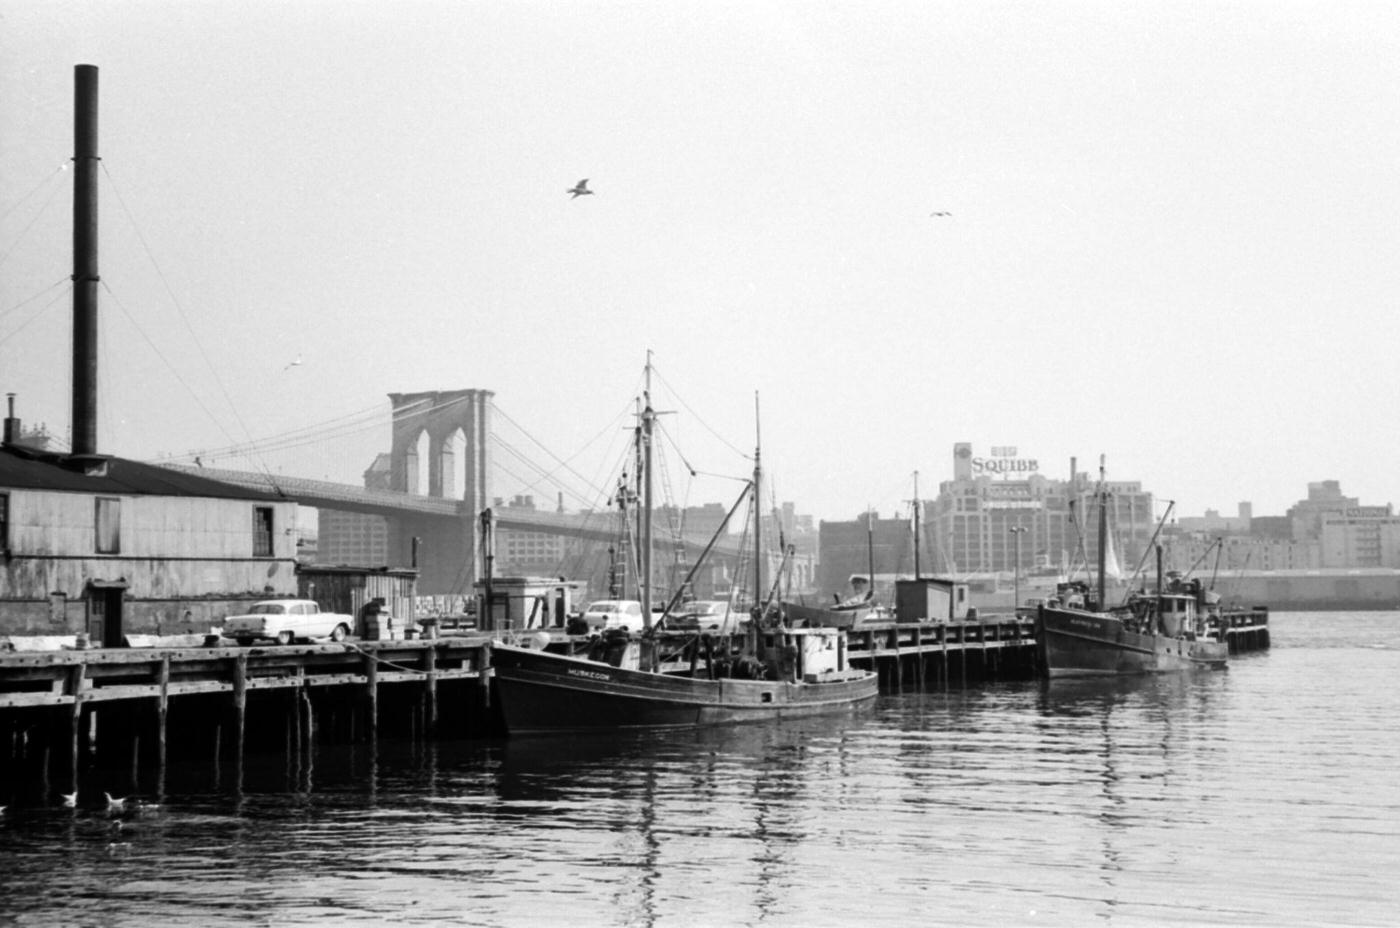 A View Of The Fulton Fish Market In South Street Seaport, Lower Manhattan, 1965.